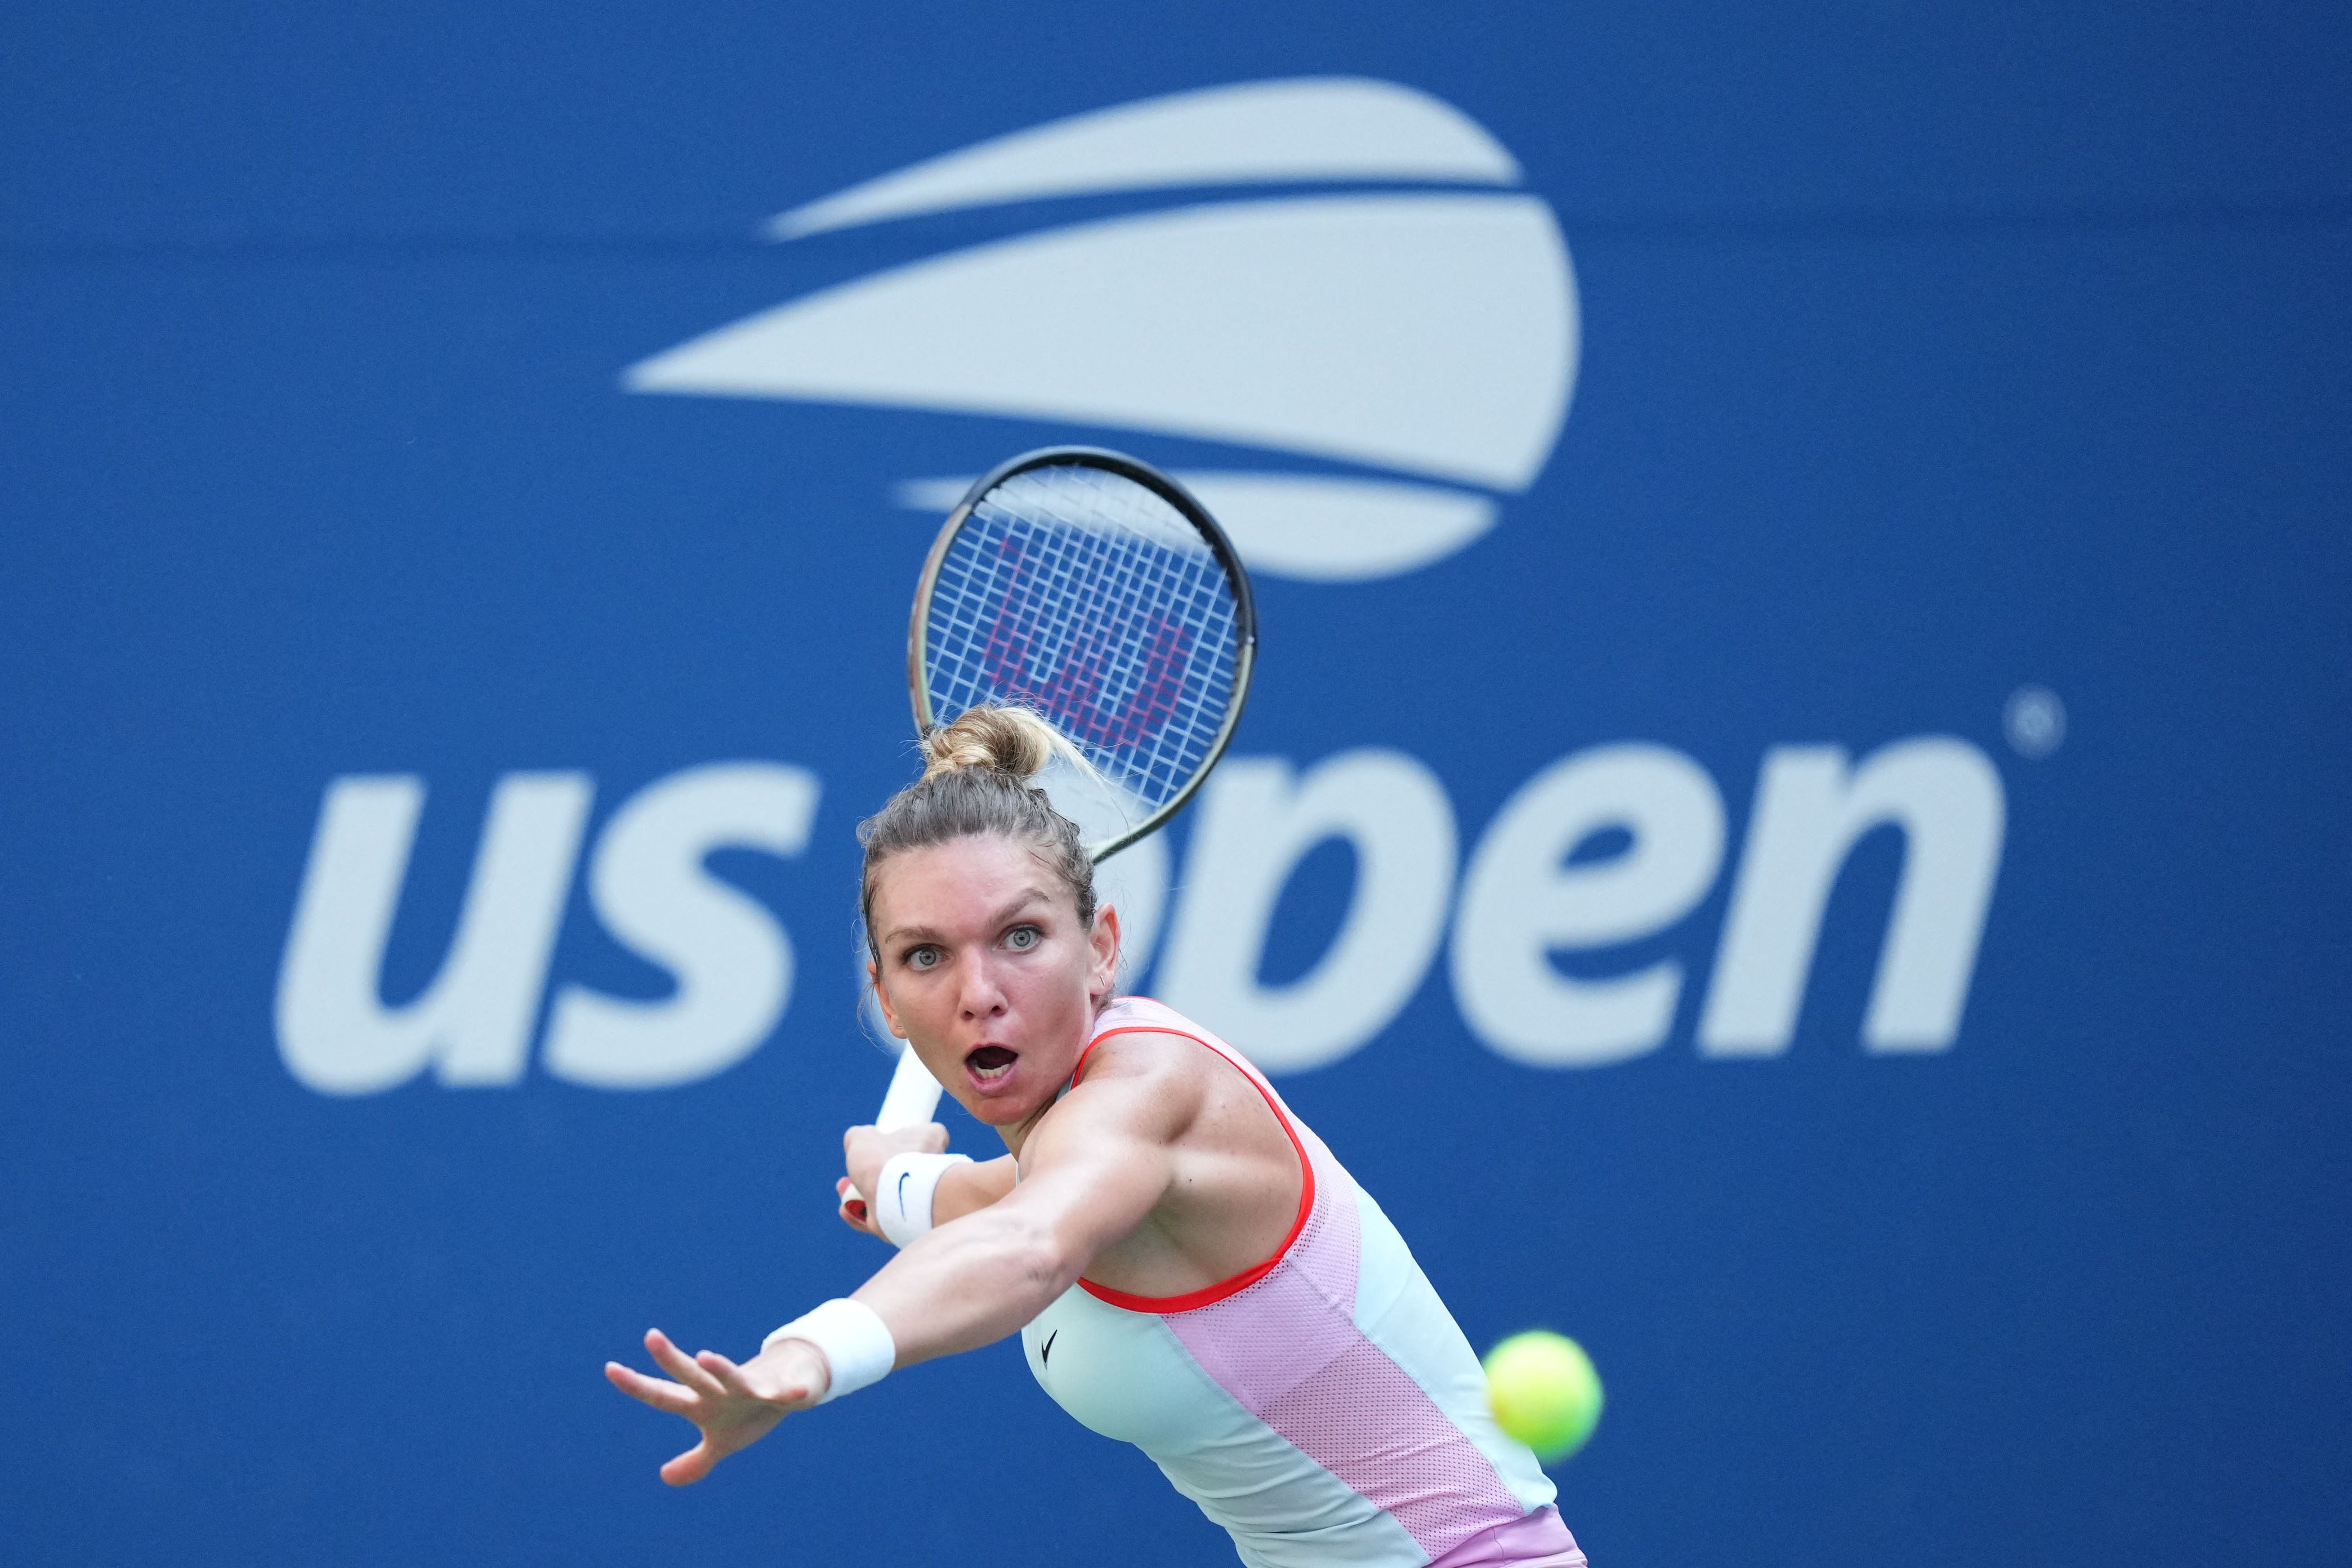 Halep's last game was at the 2022 US Open where she lost in the first round to Ukraine's Daria Snigur.